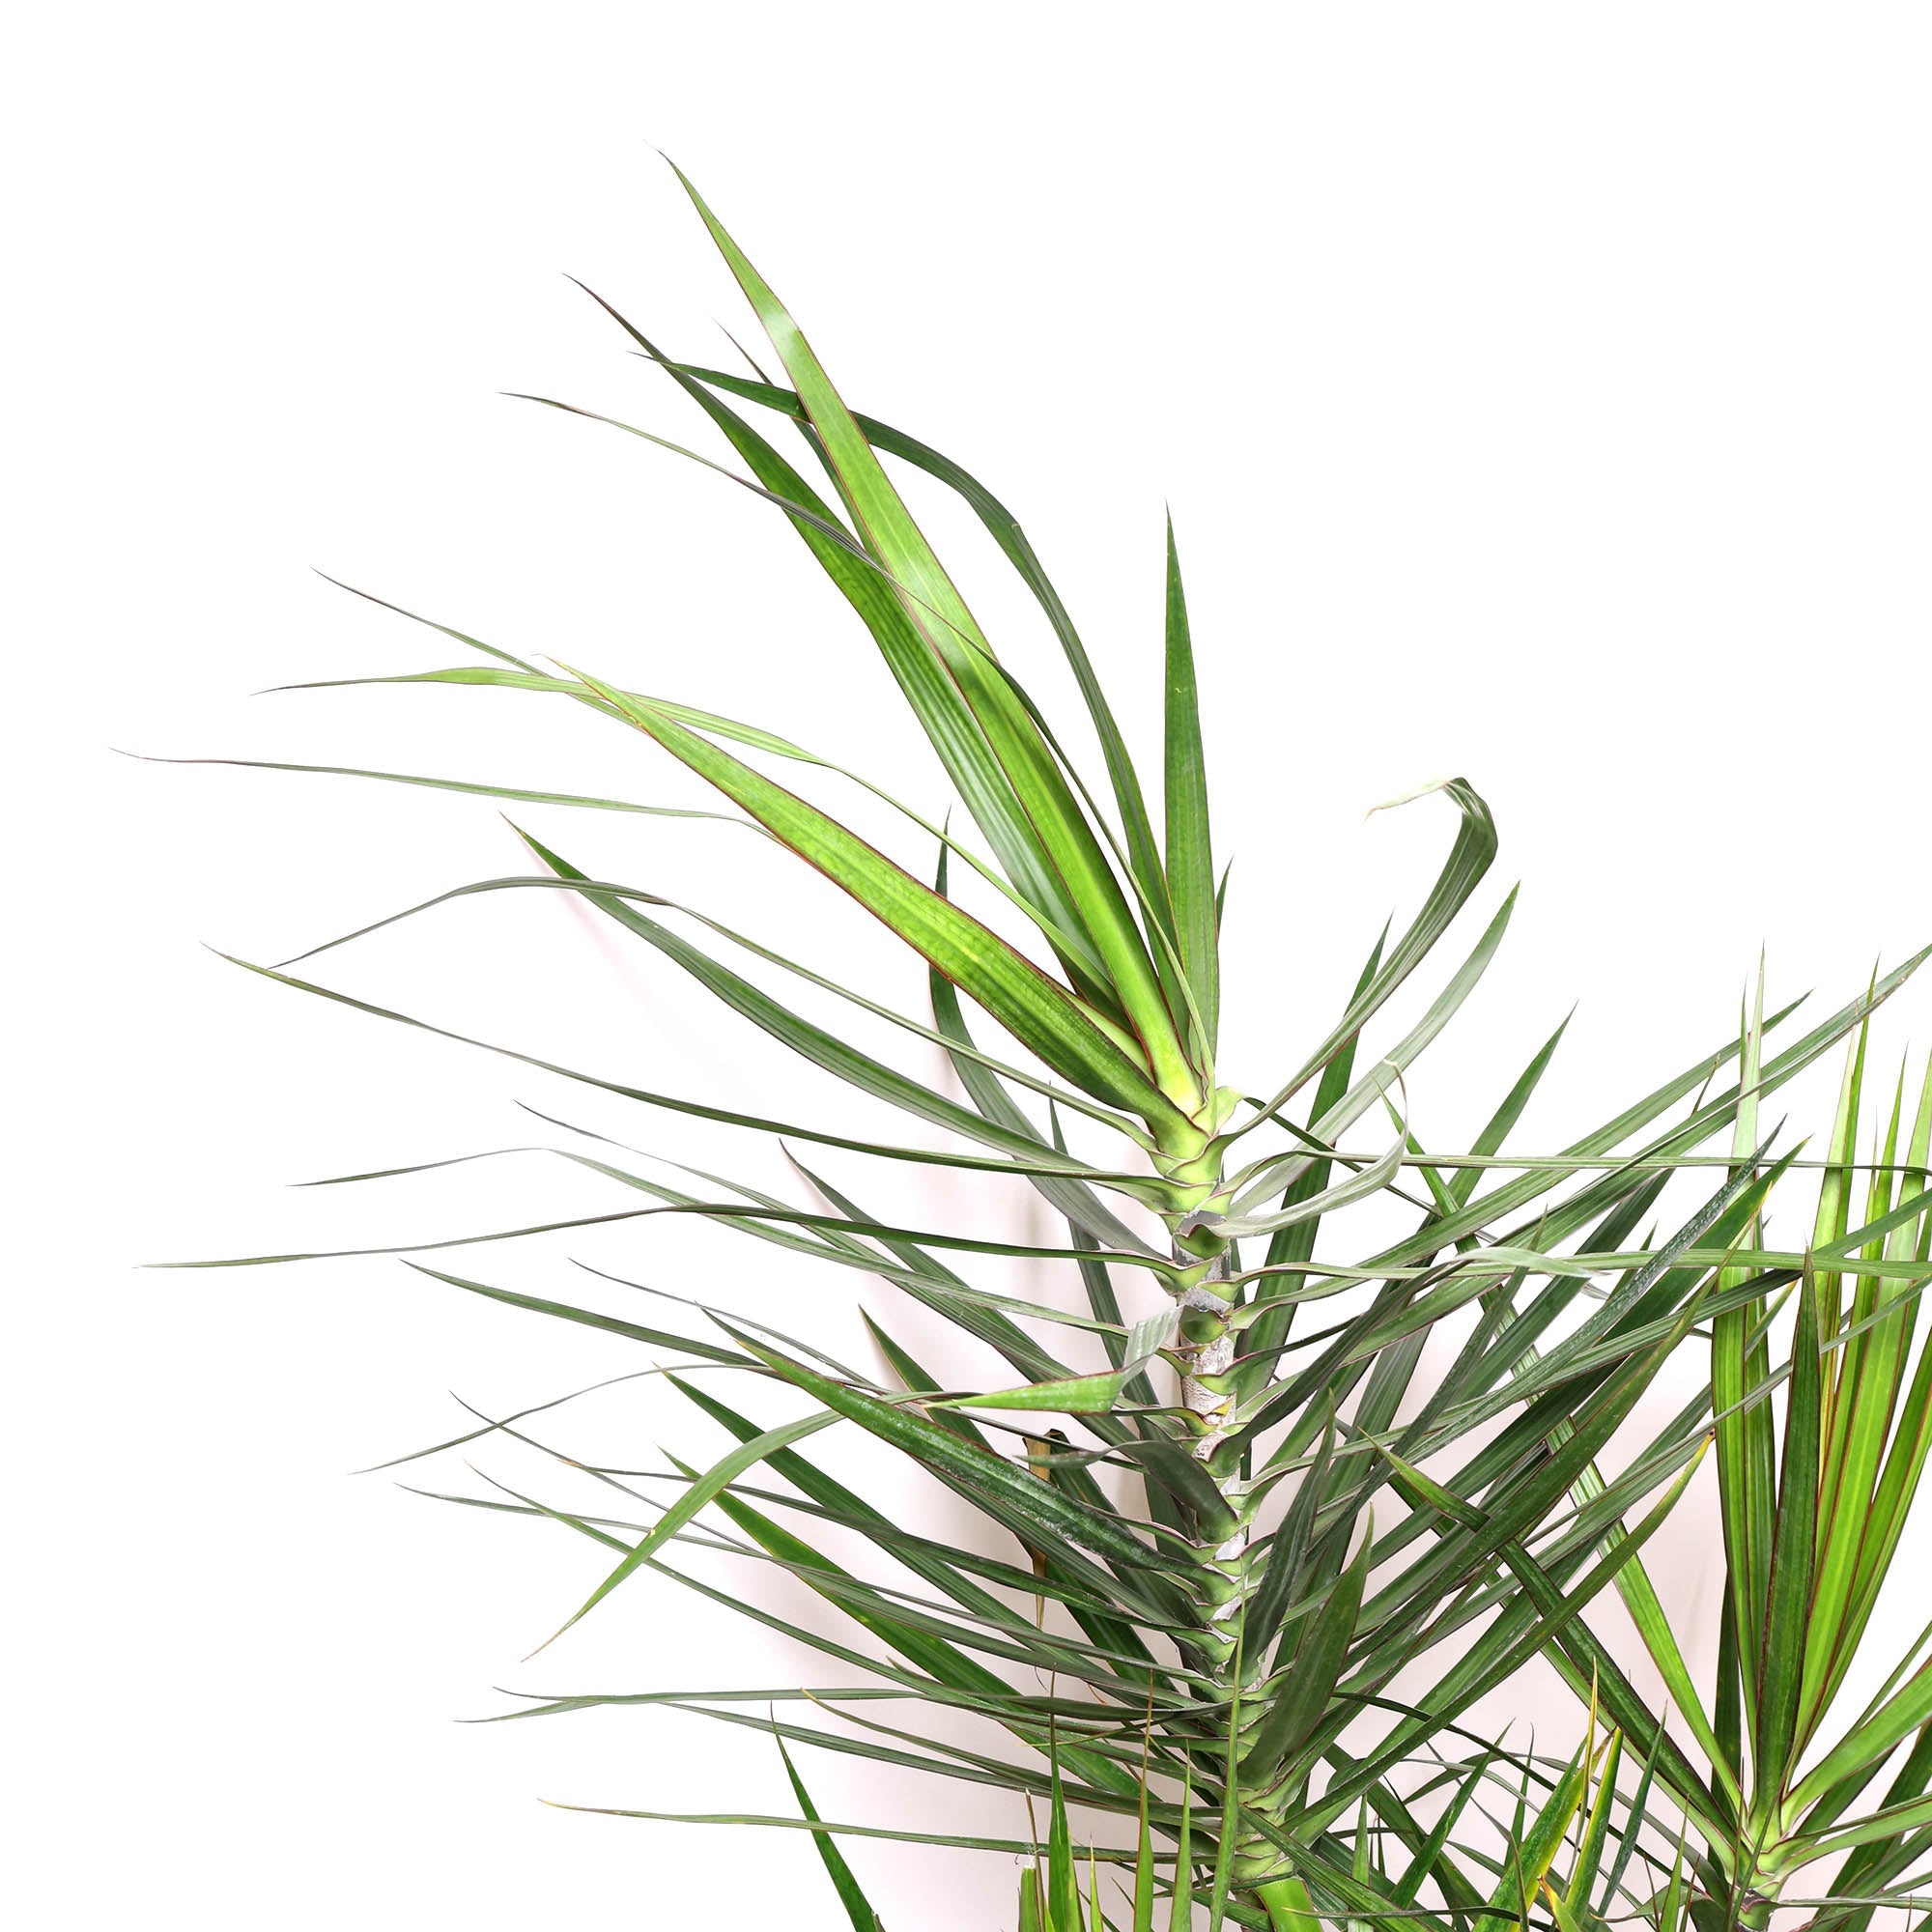 A Dracaena Marginata Staggered 12 Inches plant with long, narrow green leaves edged in red, potted in a black container against a white background.